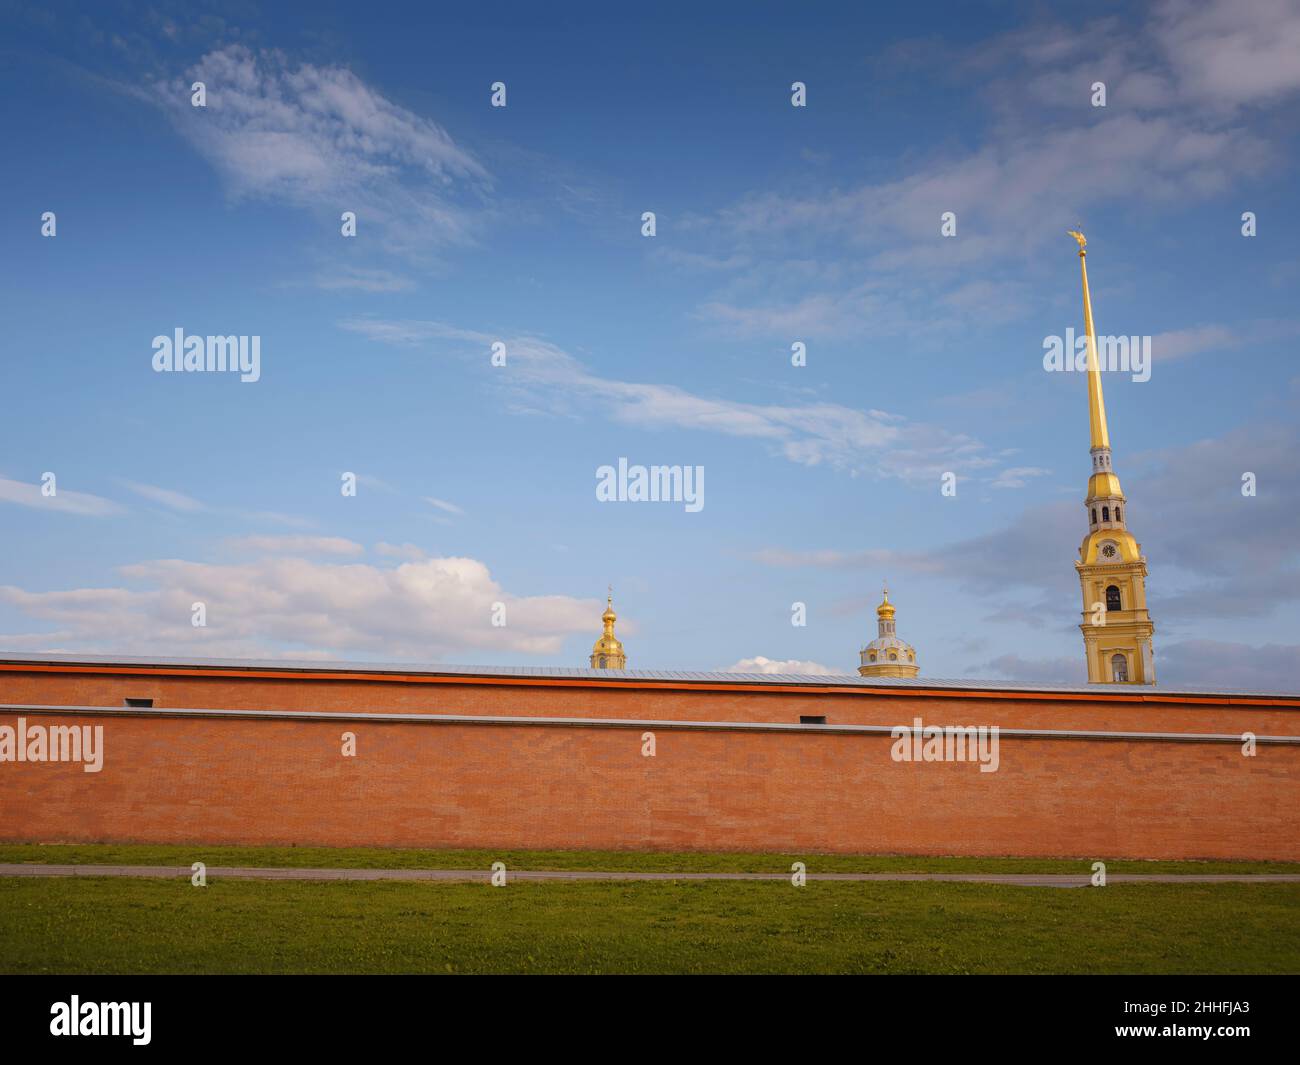 Peter-Pavel's Fortress is oldest architectural monument in St. Petersburg. Located on Hare Island, in St. Petersburg, the historical core of city. Stock Photo